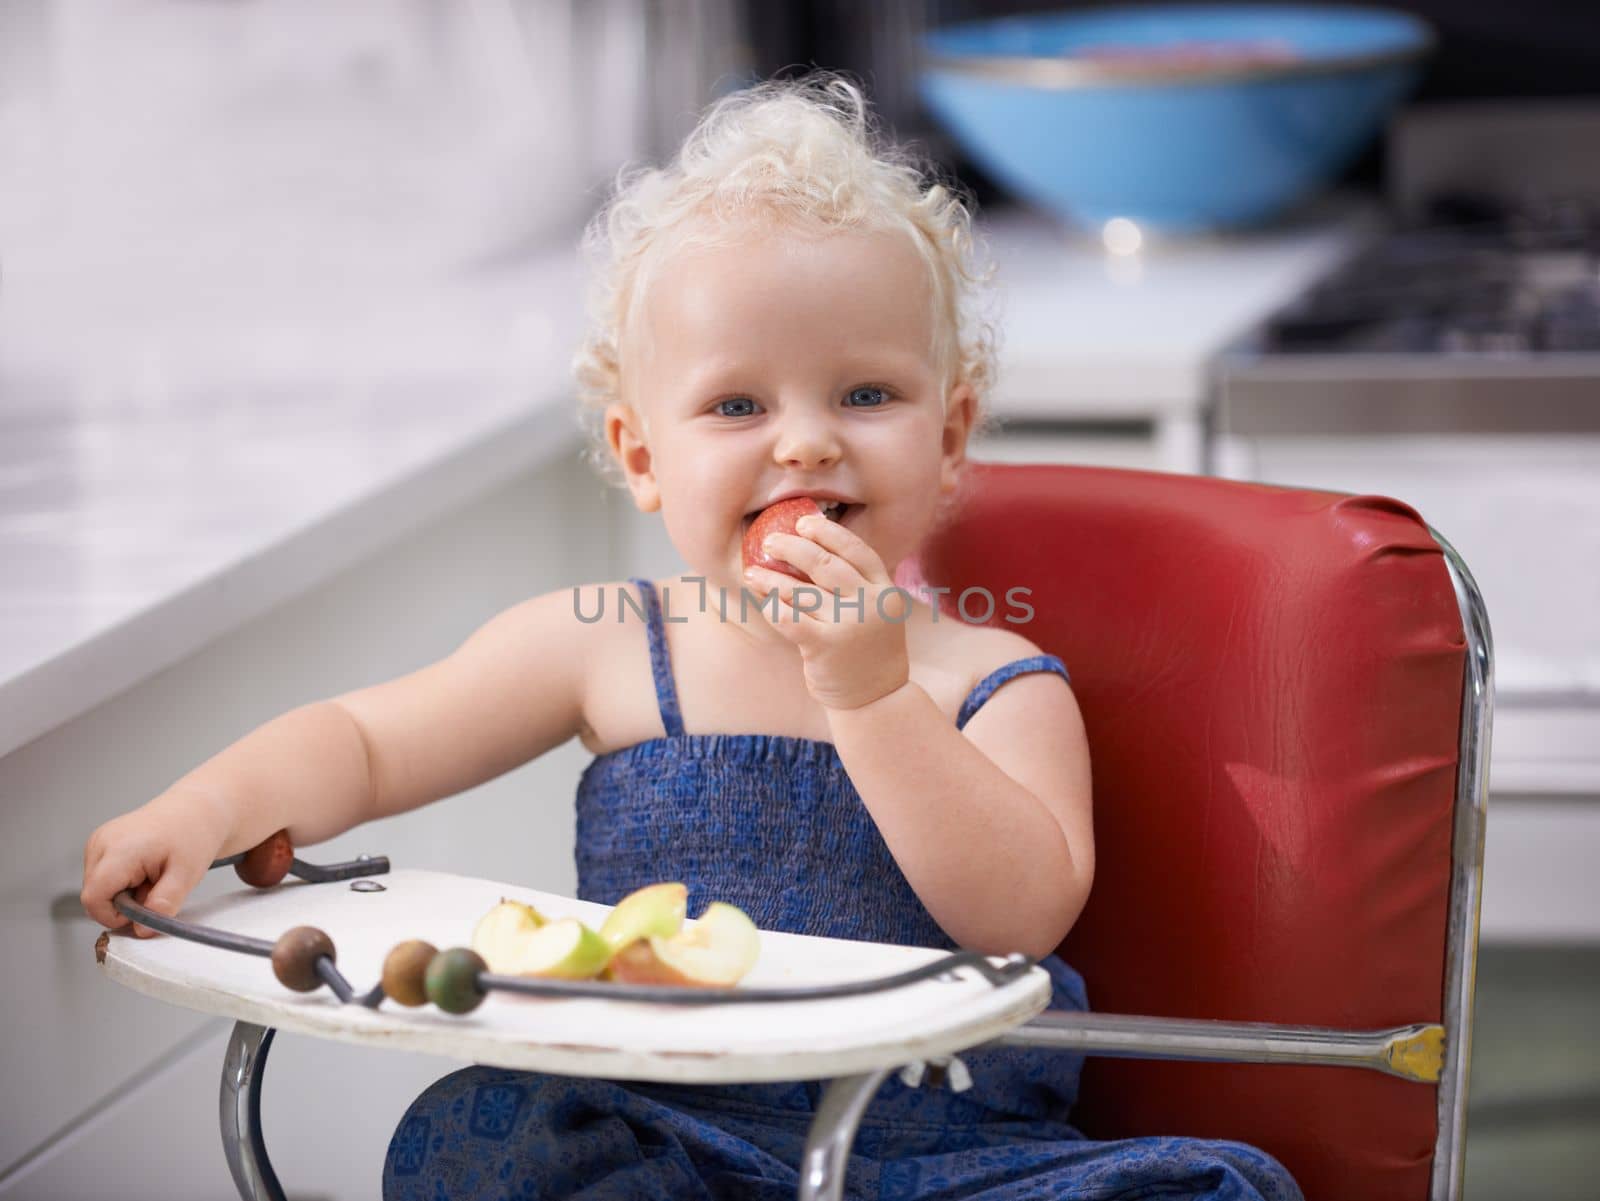 Biting into that apple. A cute baby girl with curly hair biting into an apple